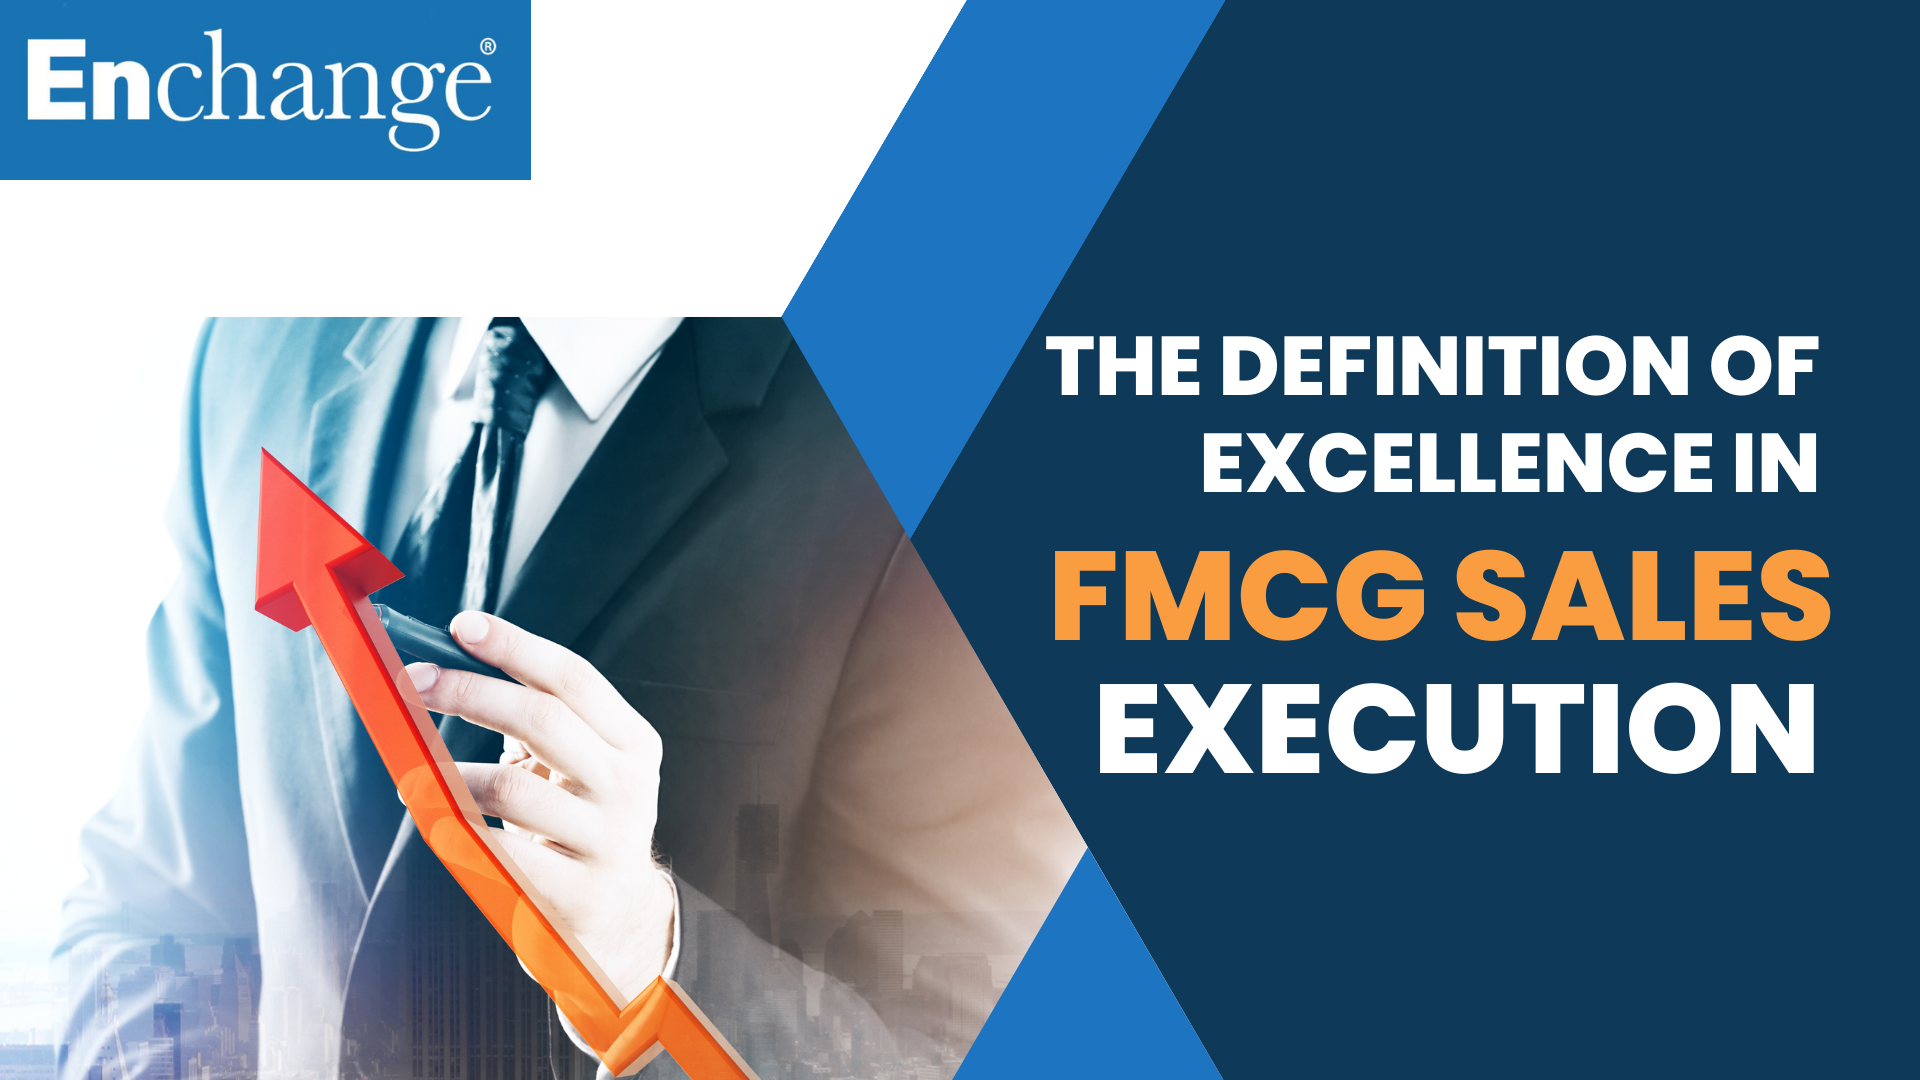 The Definition of Excellence in FMCG Sales Execution